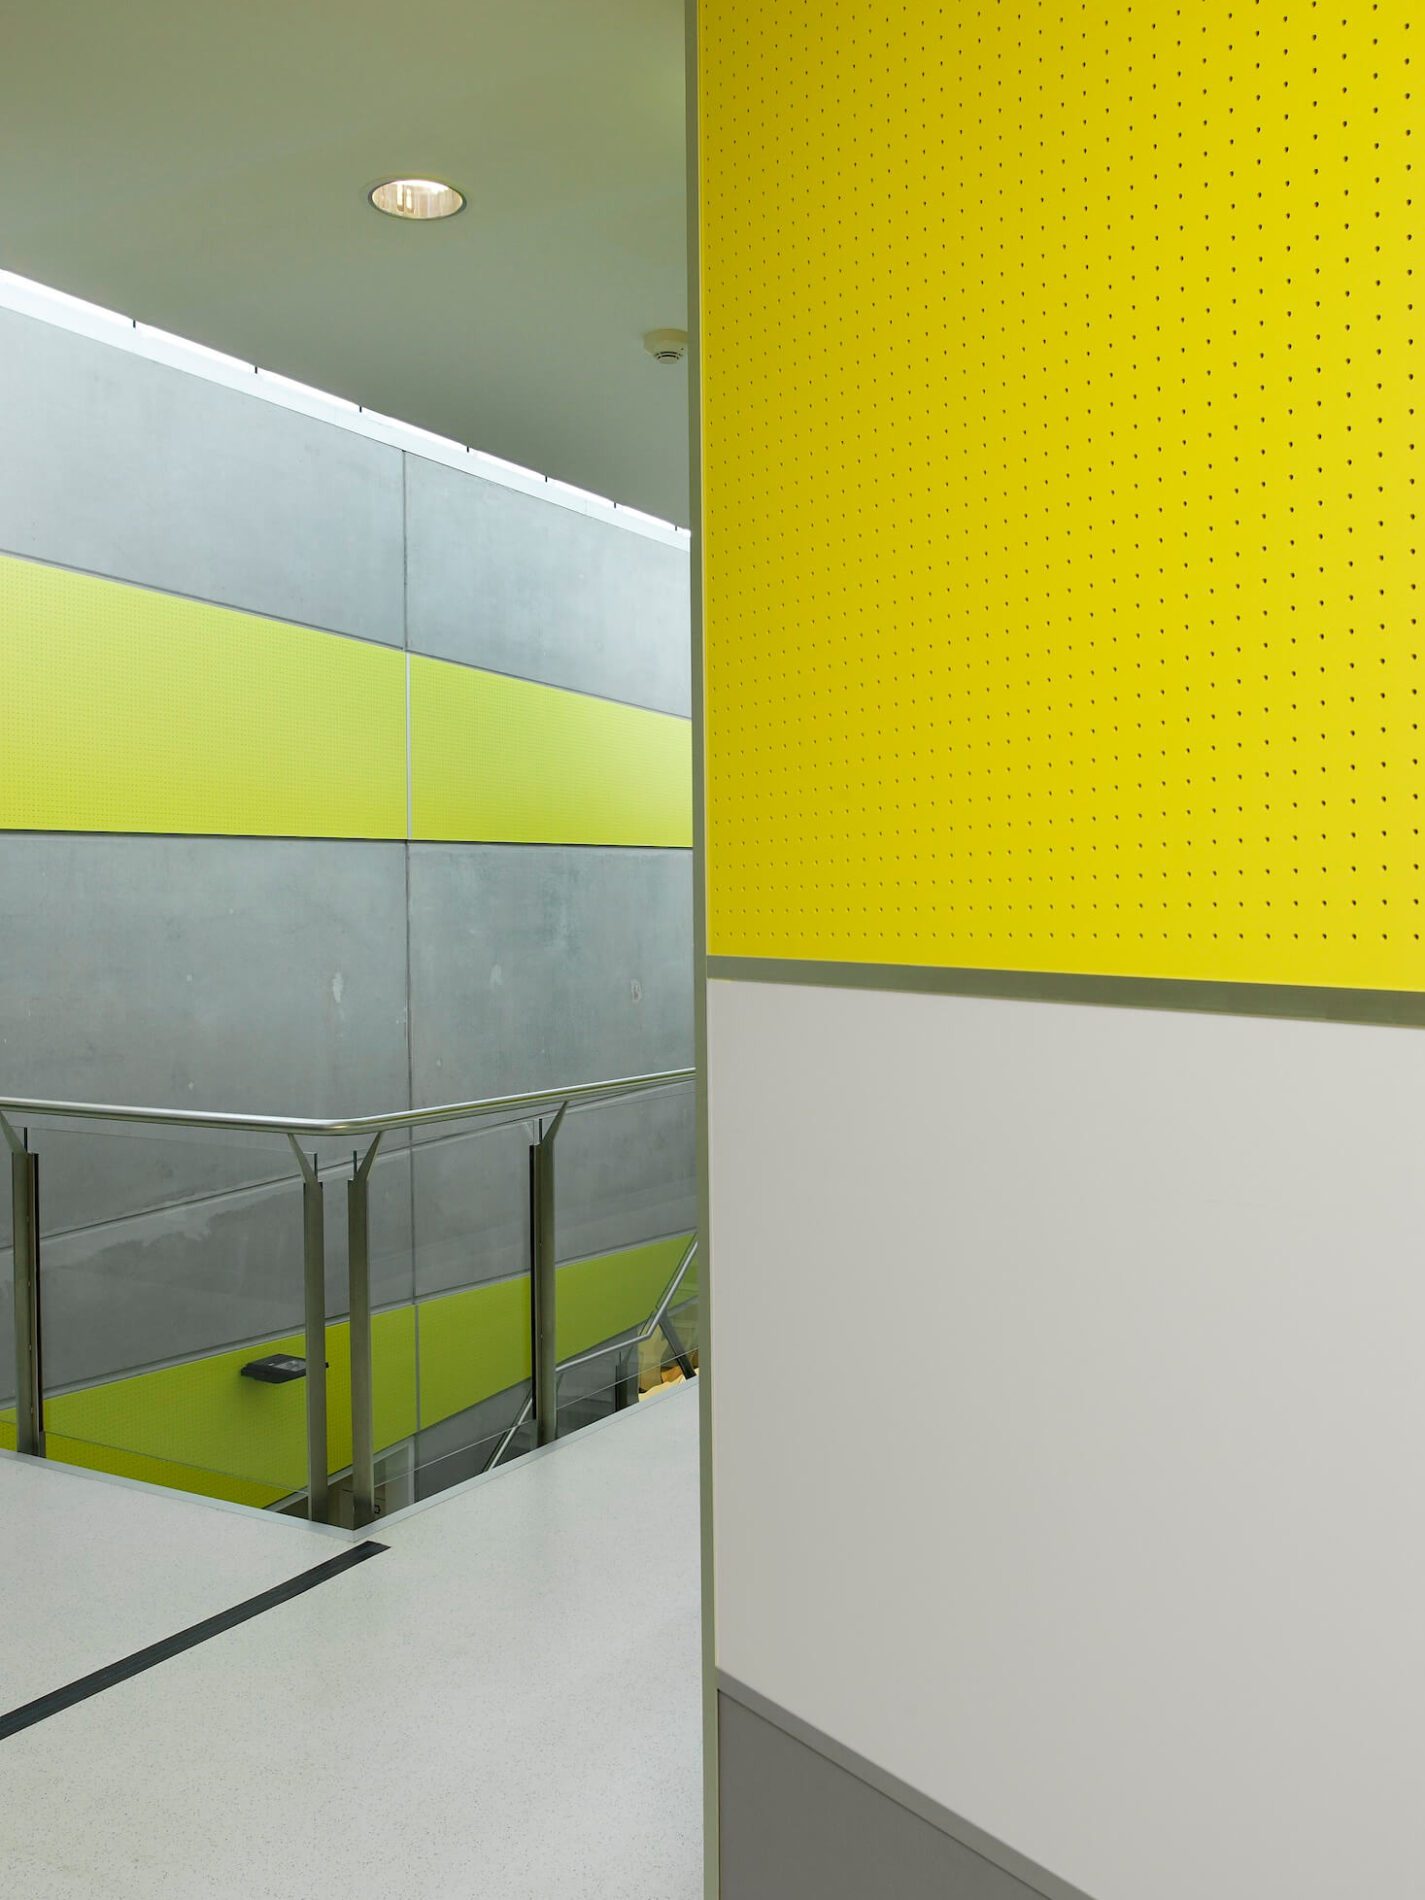 Perforated yellow cladding detail on internal skin of circulation and stairwell within concrete police complex